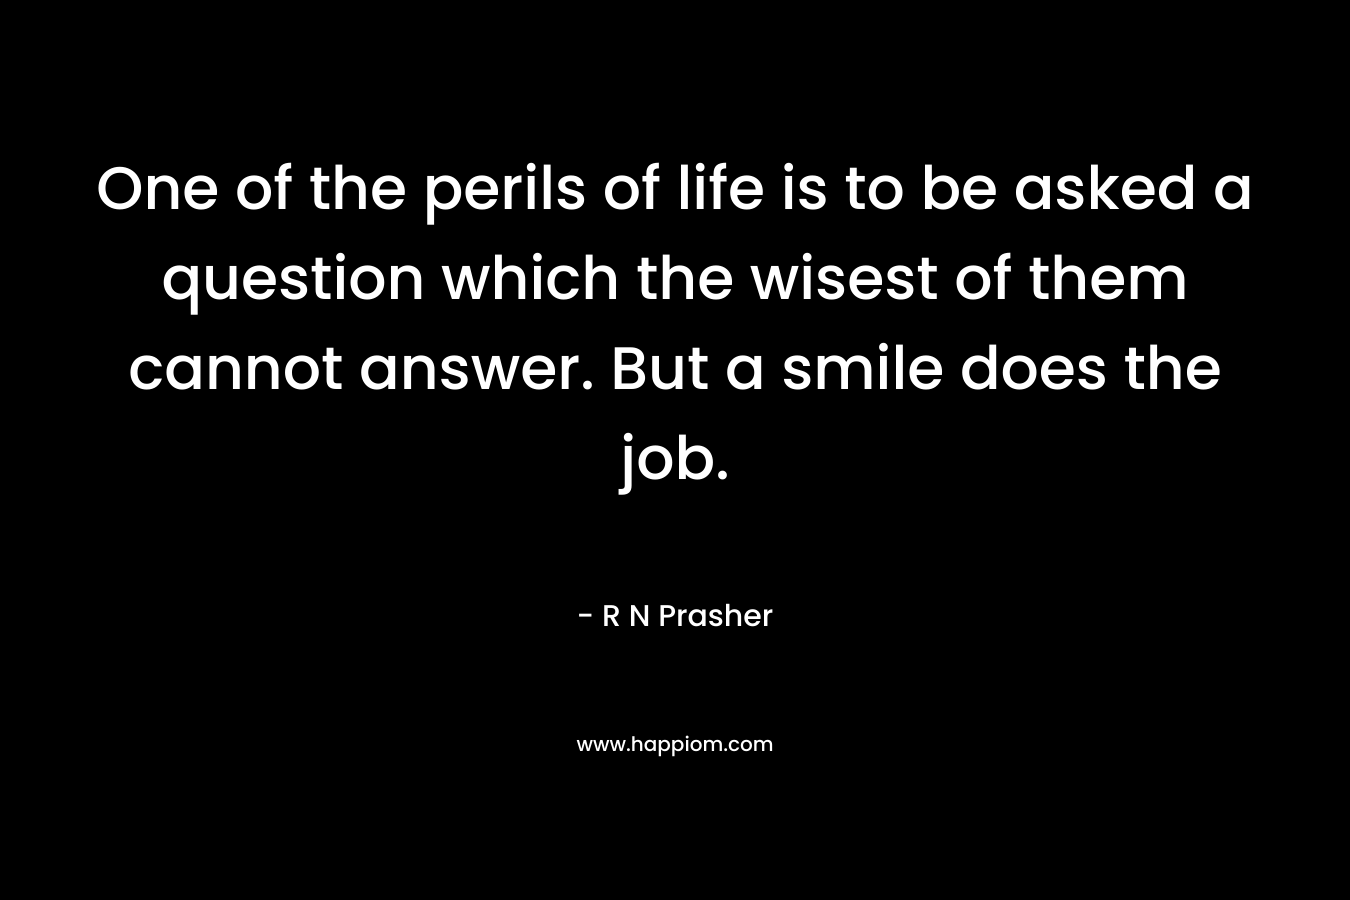 One of the perils of life is to be asked a question which the wisest of them cannot answer. But a smile does the job. – R N Prasher